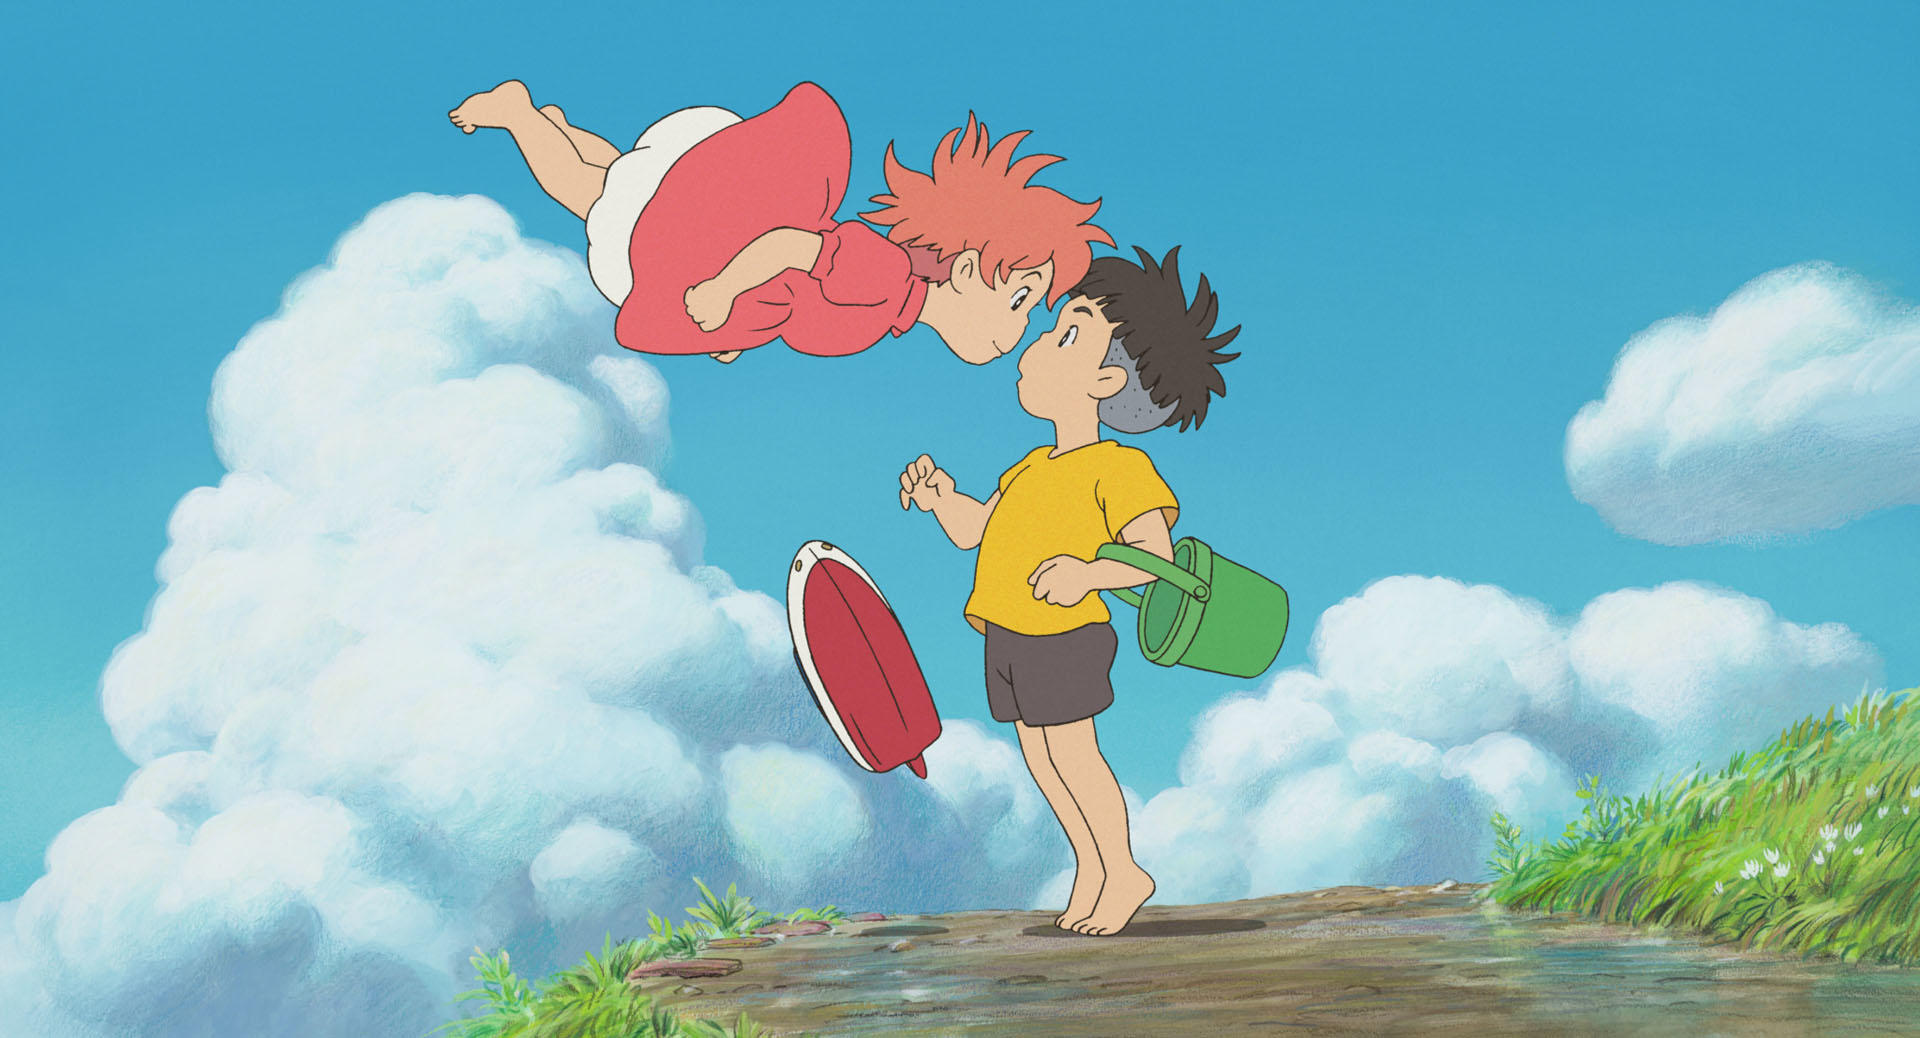 Studio Ghibli releases 400 images for you to use however you want